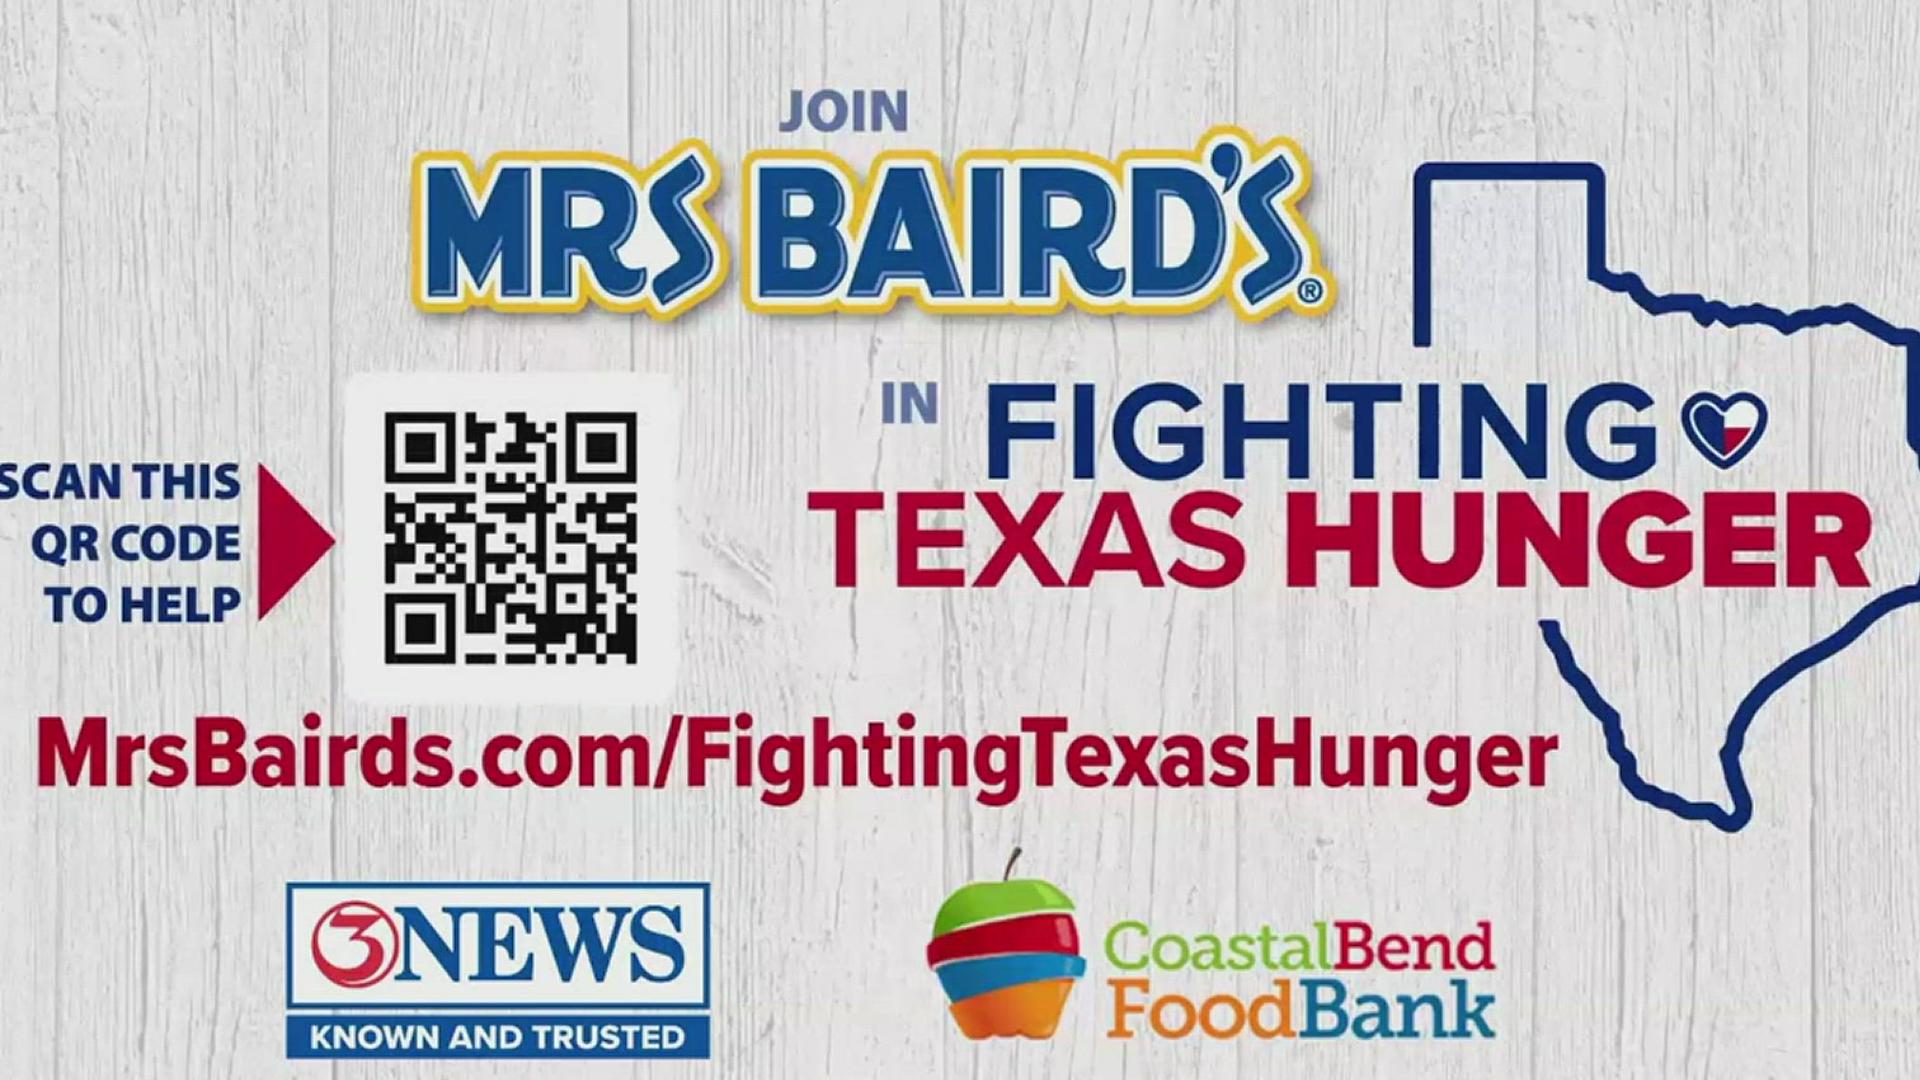 This is Mrs. Baird's third year of their month-long 'Fighting Texas Hunger' campaign to bring fresh bread to those in need.